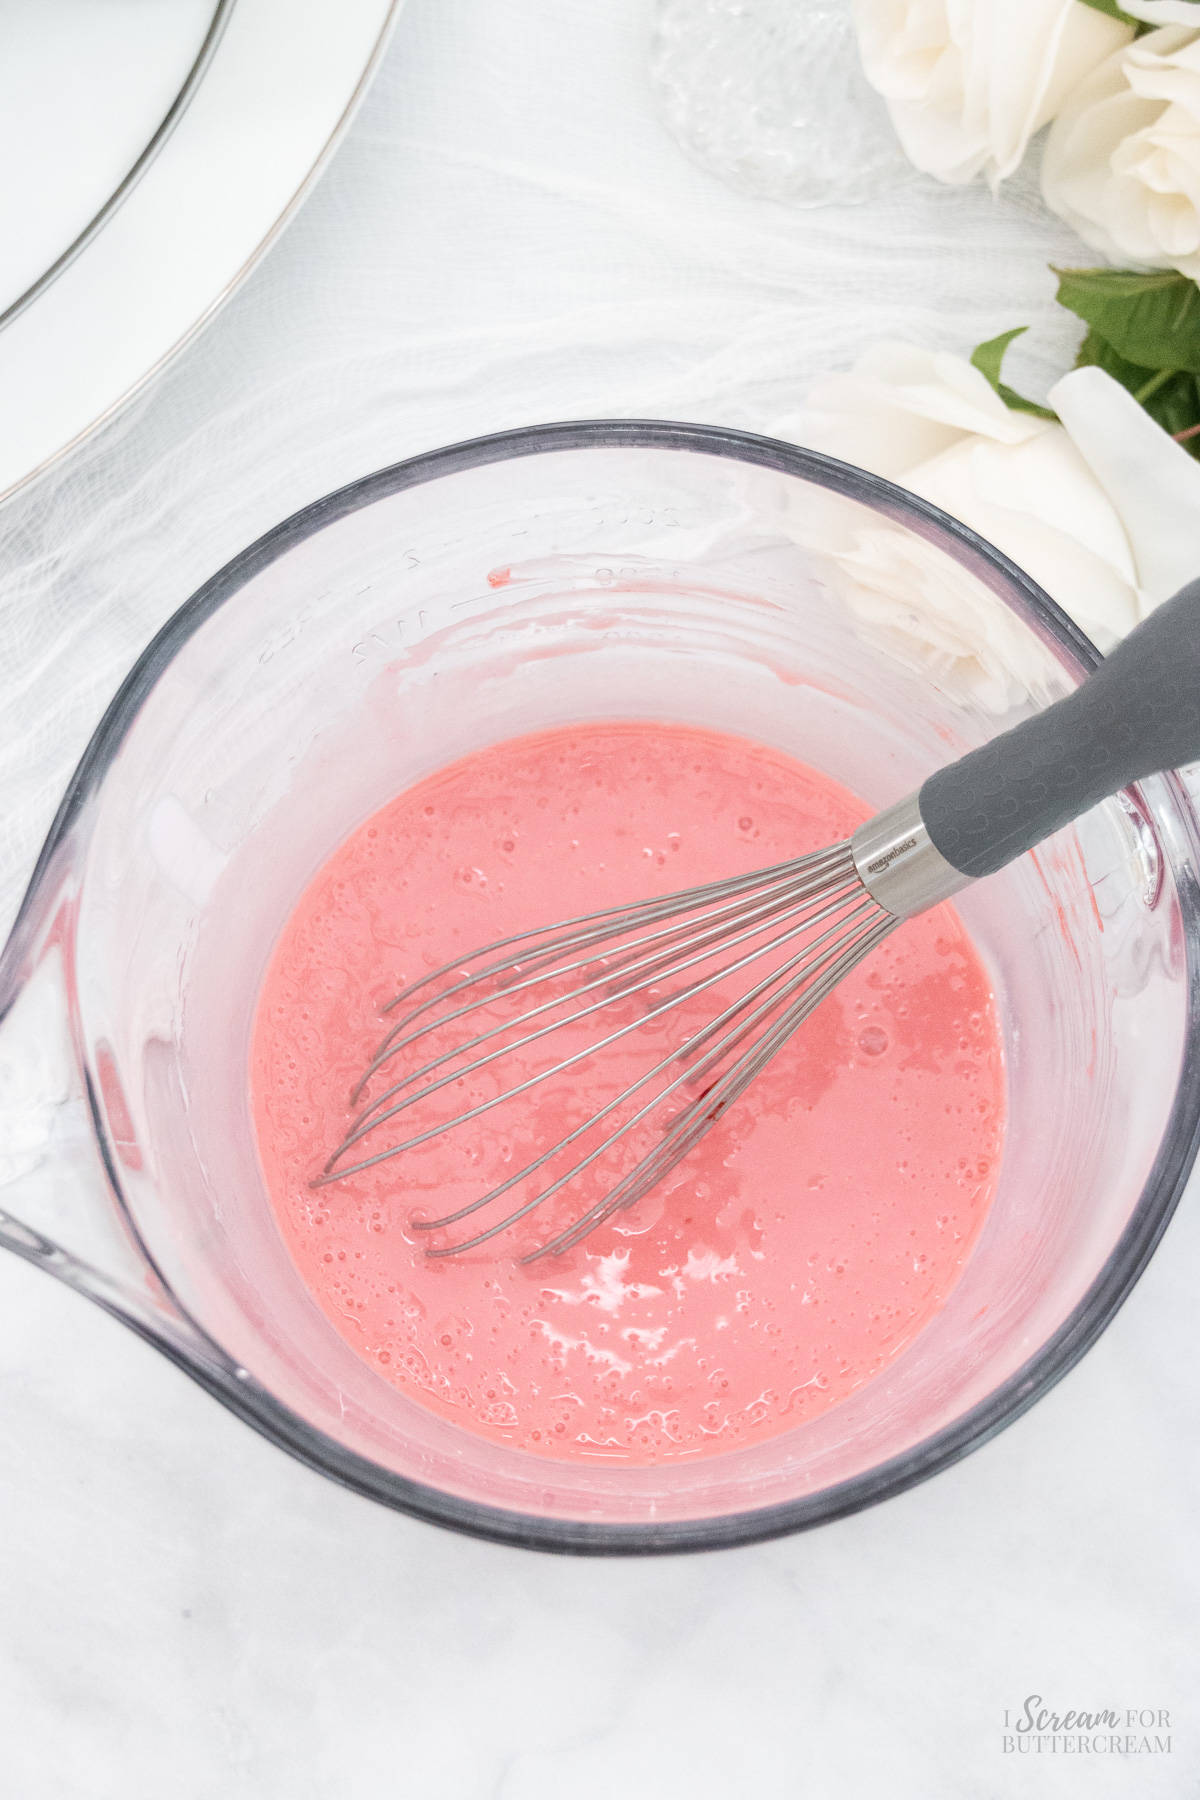 Liquid cake ingredients in a glass bowl with a whisk.